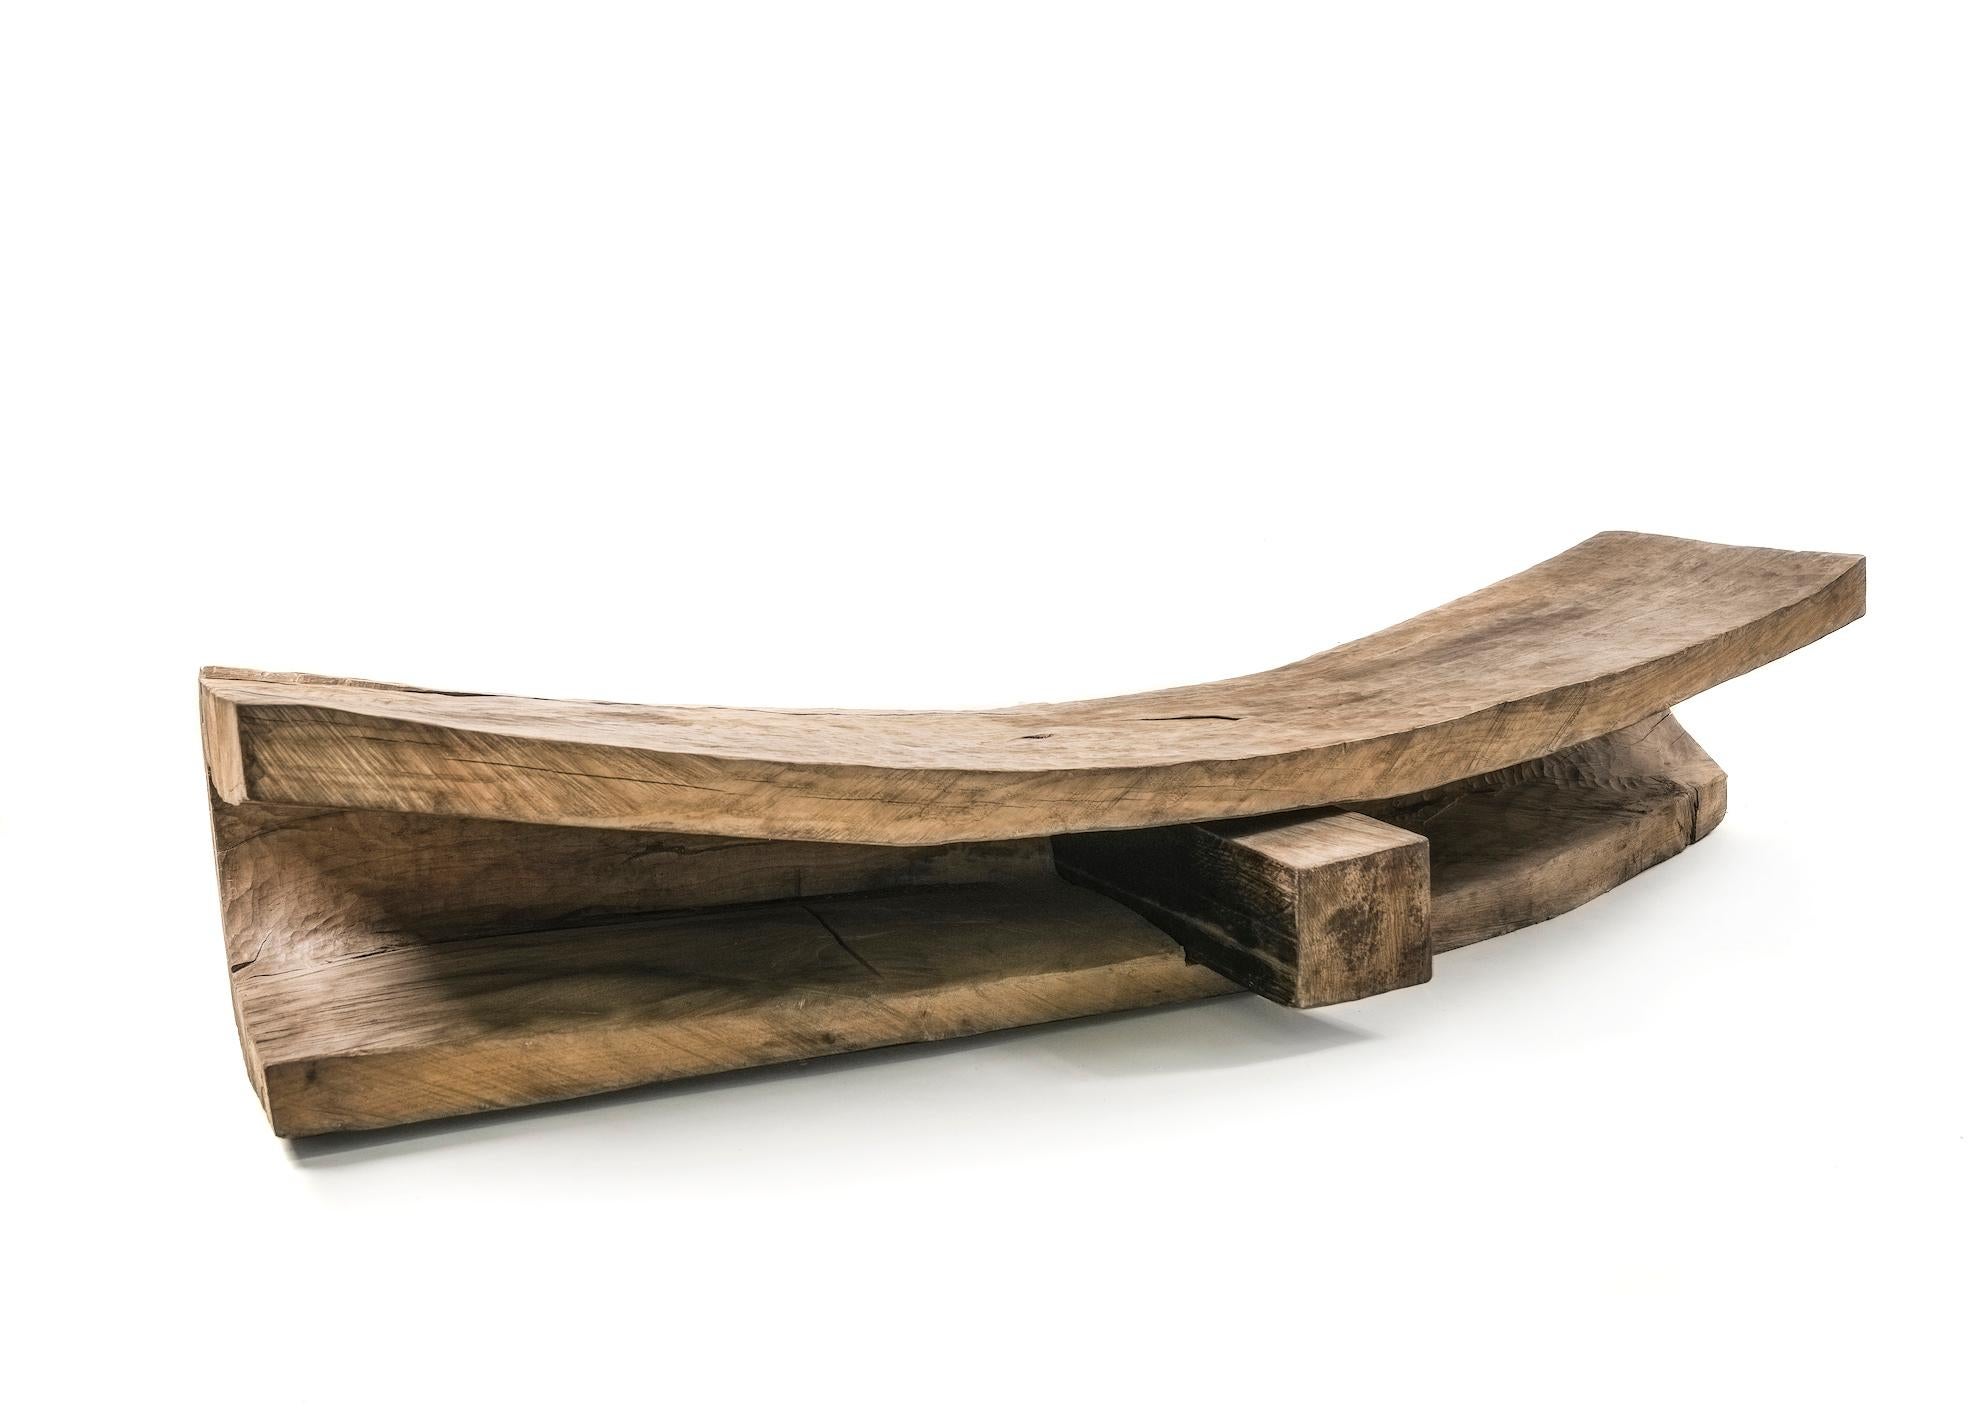 Massive bench made of solid oak (+ linseed oil)
(Outdoor use OK)
Measures: 300 x 70 x 35 cm

SÓHA design studio conceives and produces furniture design and decorative objects in solid oak in an authentic style. Inspiration to create all these items